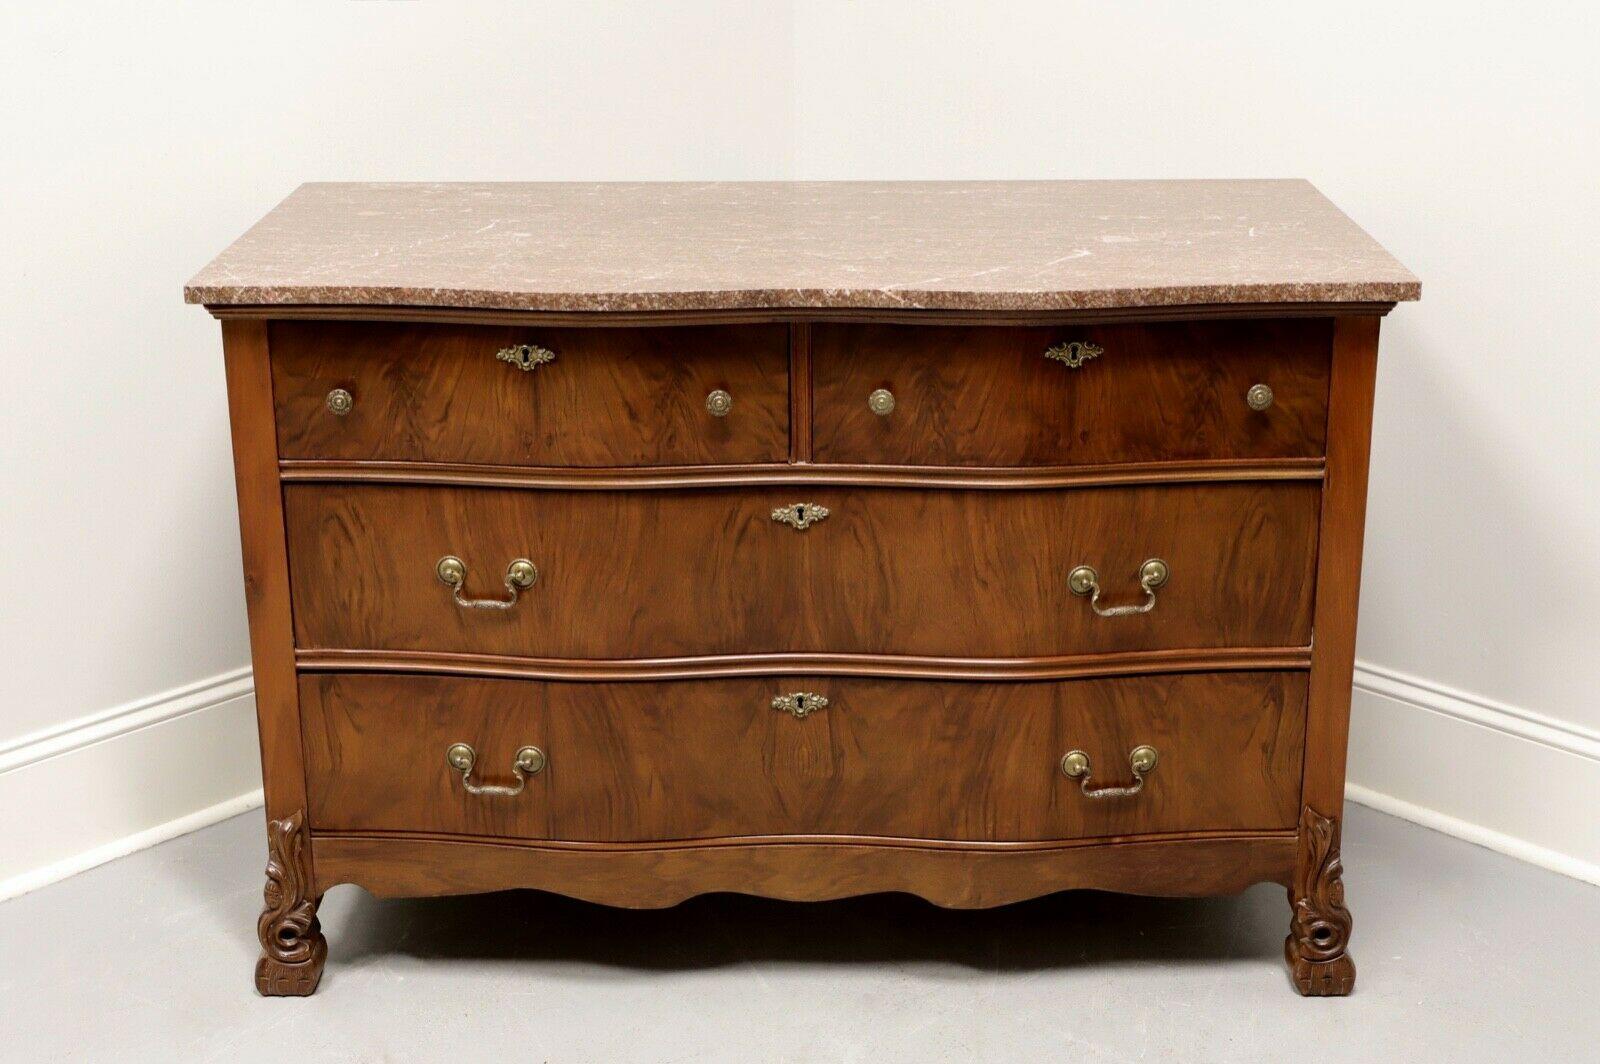 An antique French influenced North African style marble top chest, unbranded. Algerian oak with serpentine front, brass hardware, red/pink grained marble top and carved front feet. Features two smaller over two larger dovetail drawers with faux